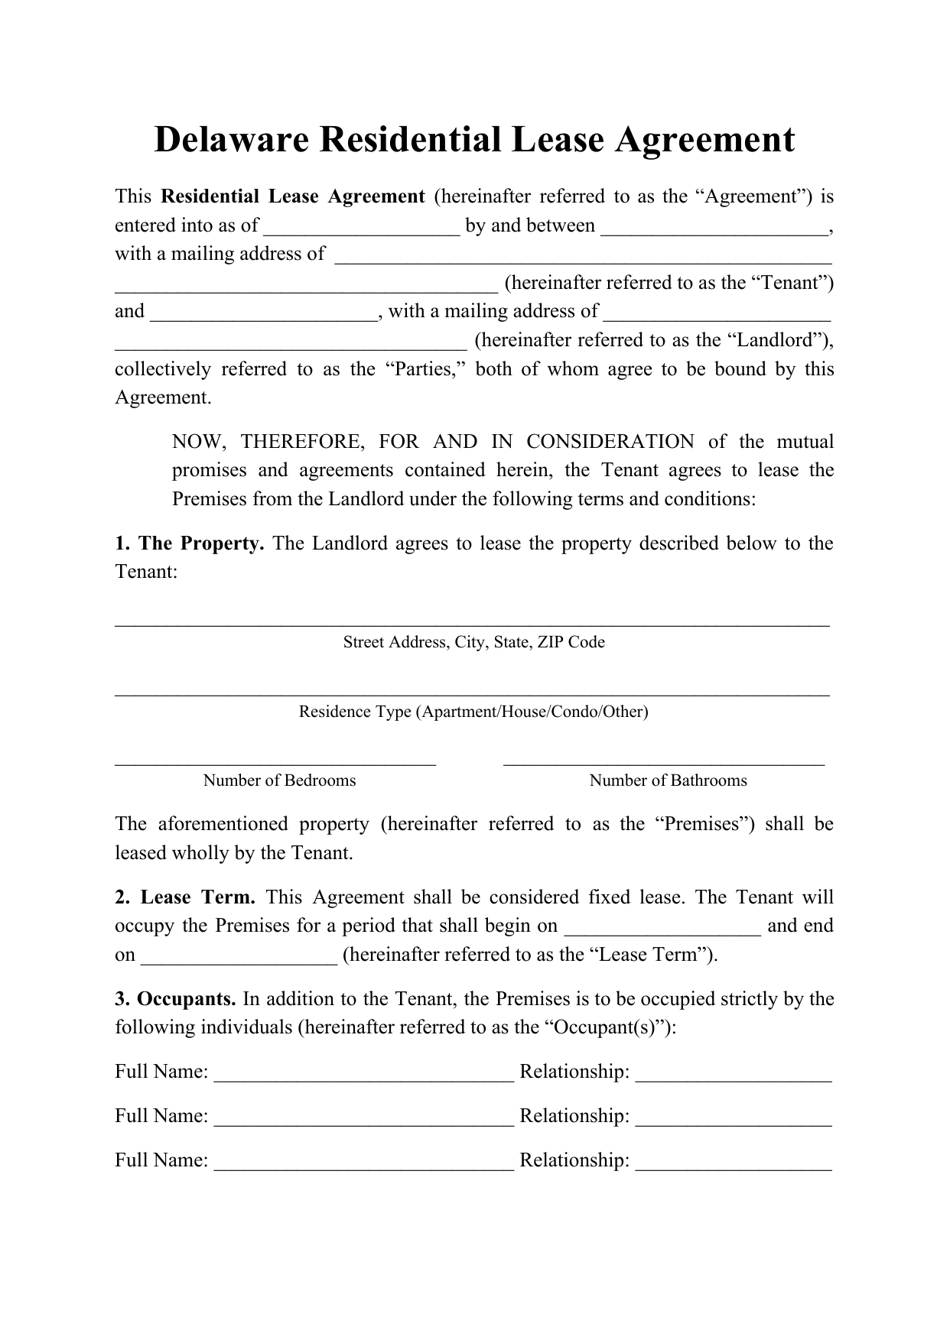 Residential Lease Agreement Template - Delaware, Page 1